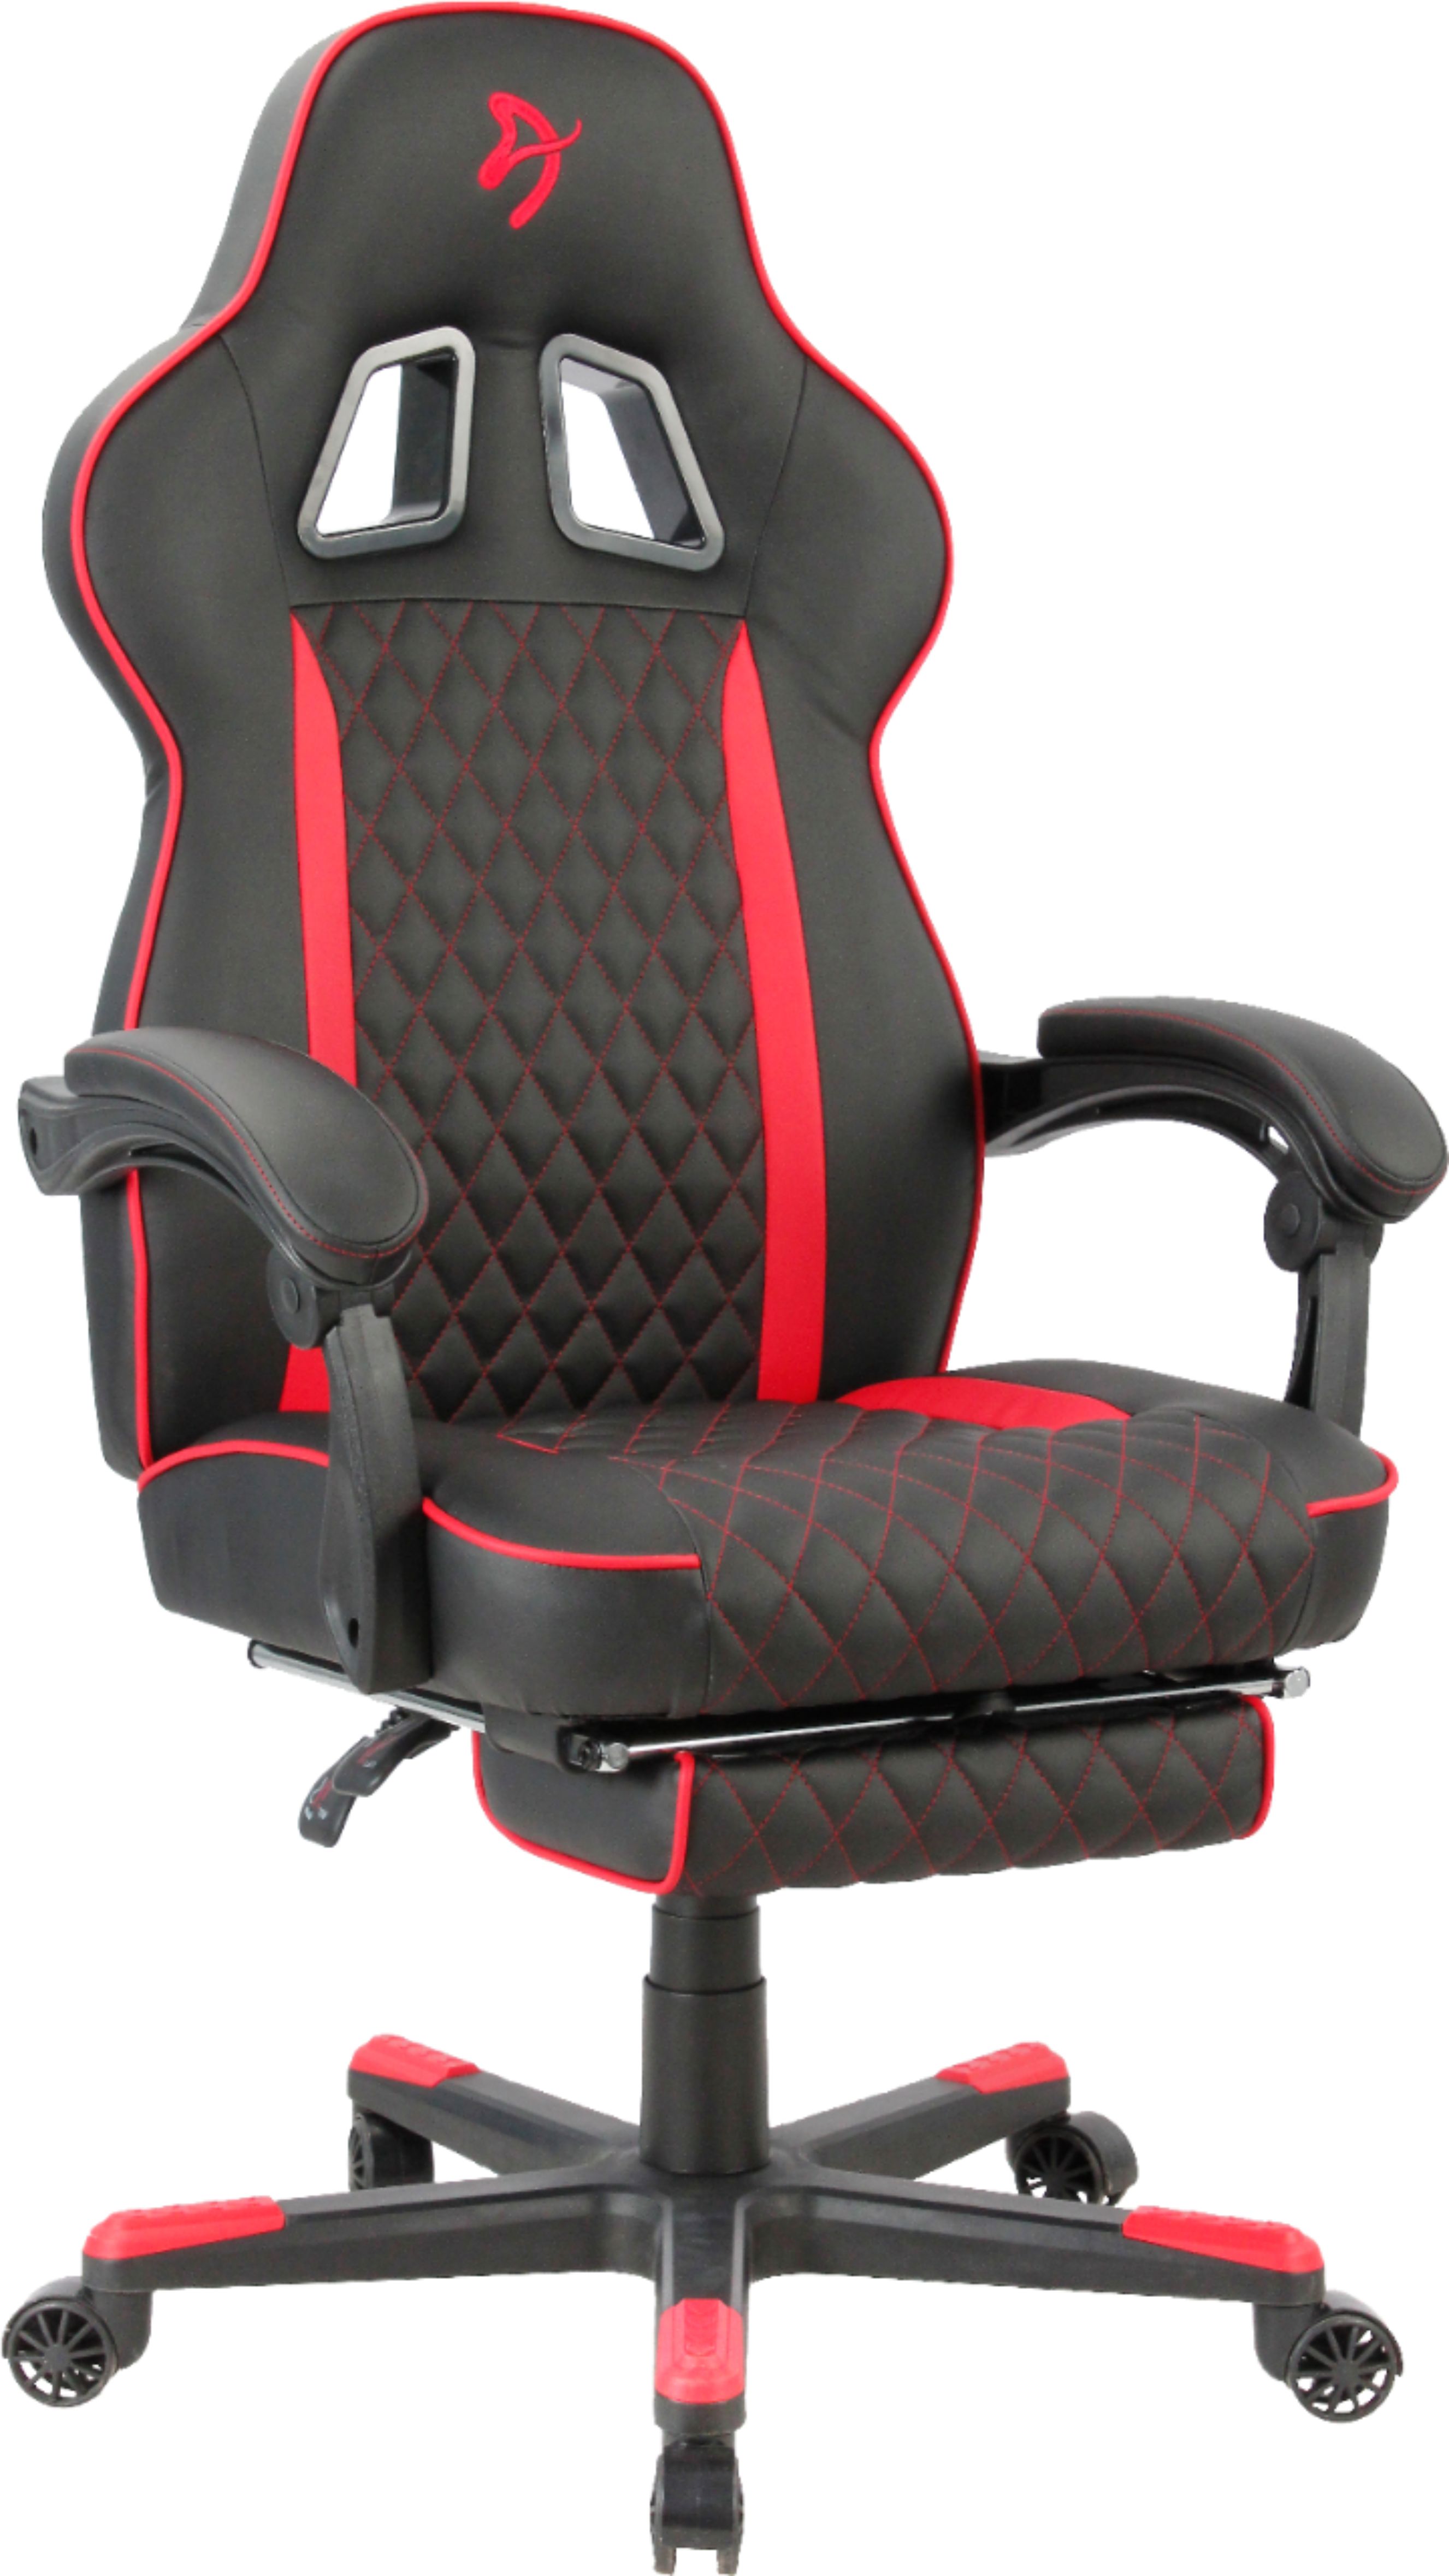 Angle View: Arozzi - Mugello Special Edition Gaming Chair with Footrest - Red